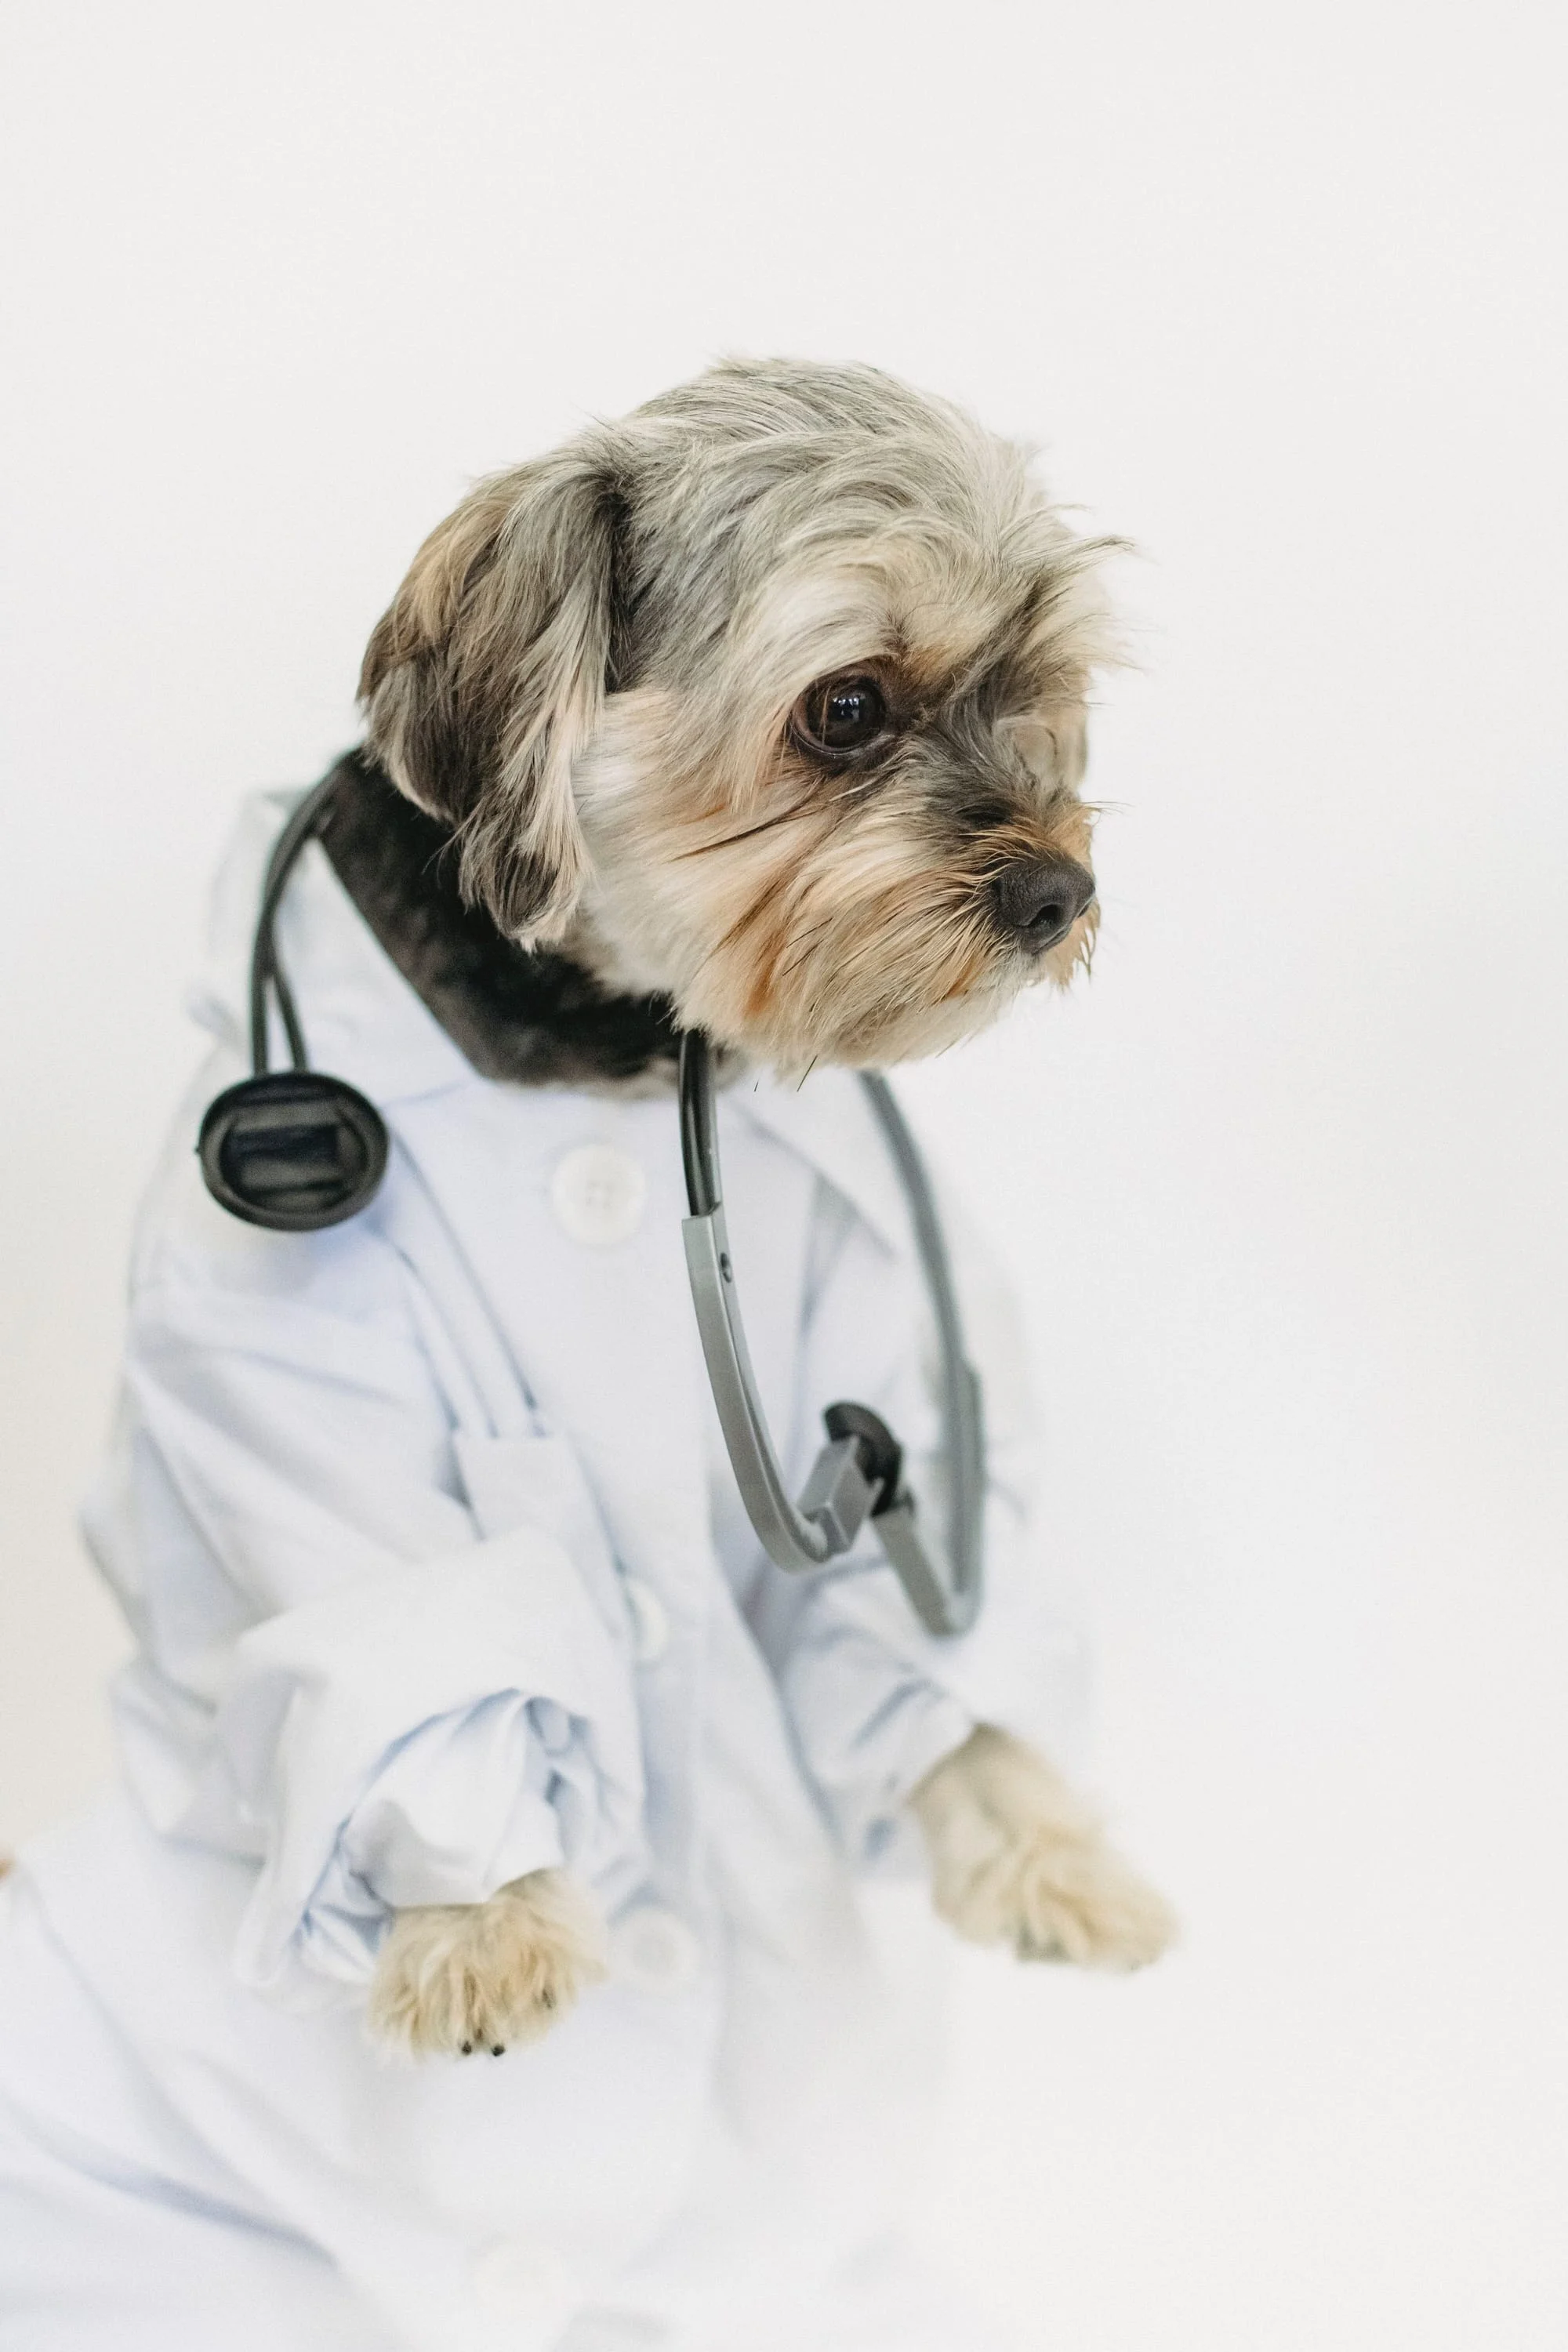 Dog dressed as a doctor